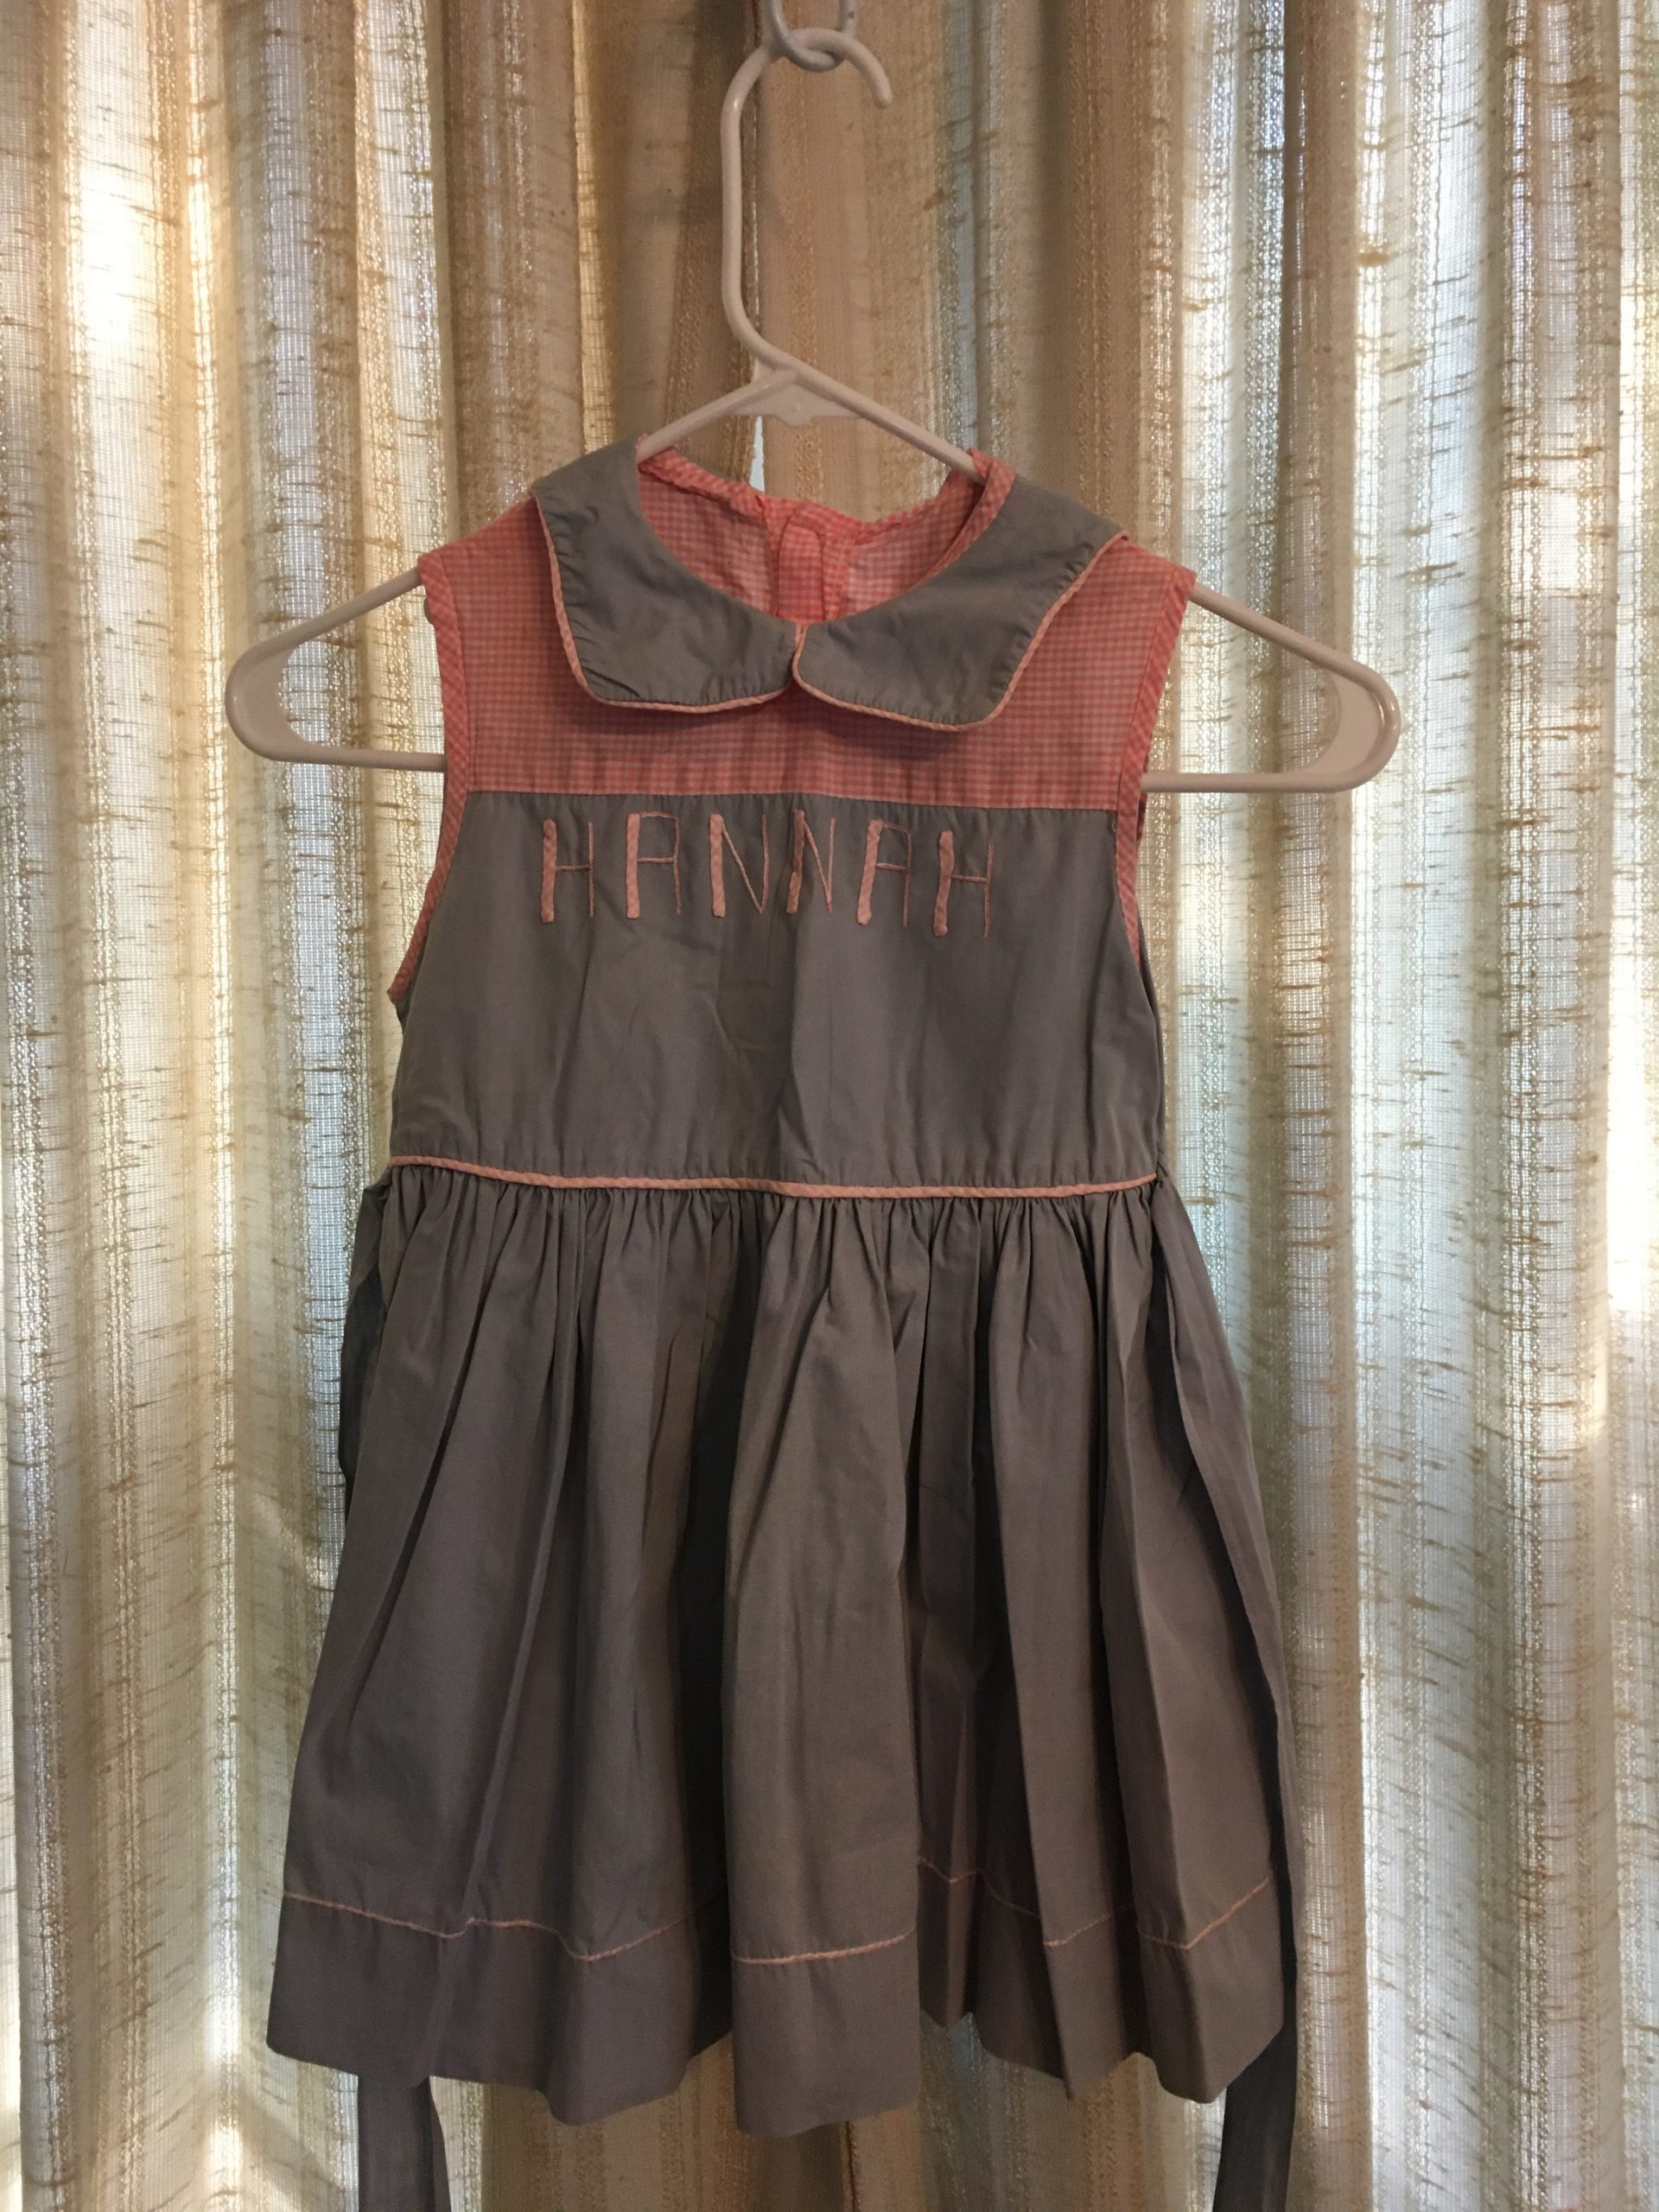 A child's dress hangs in front of a window.